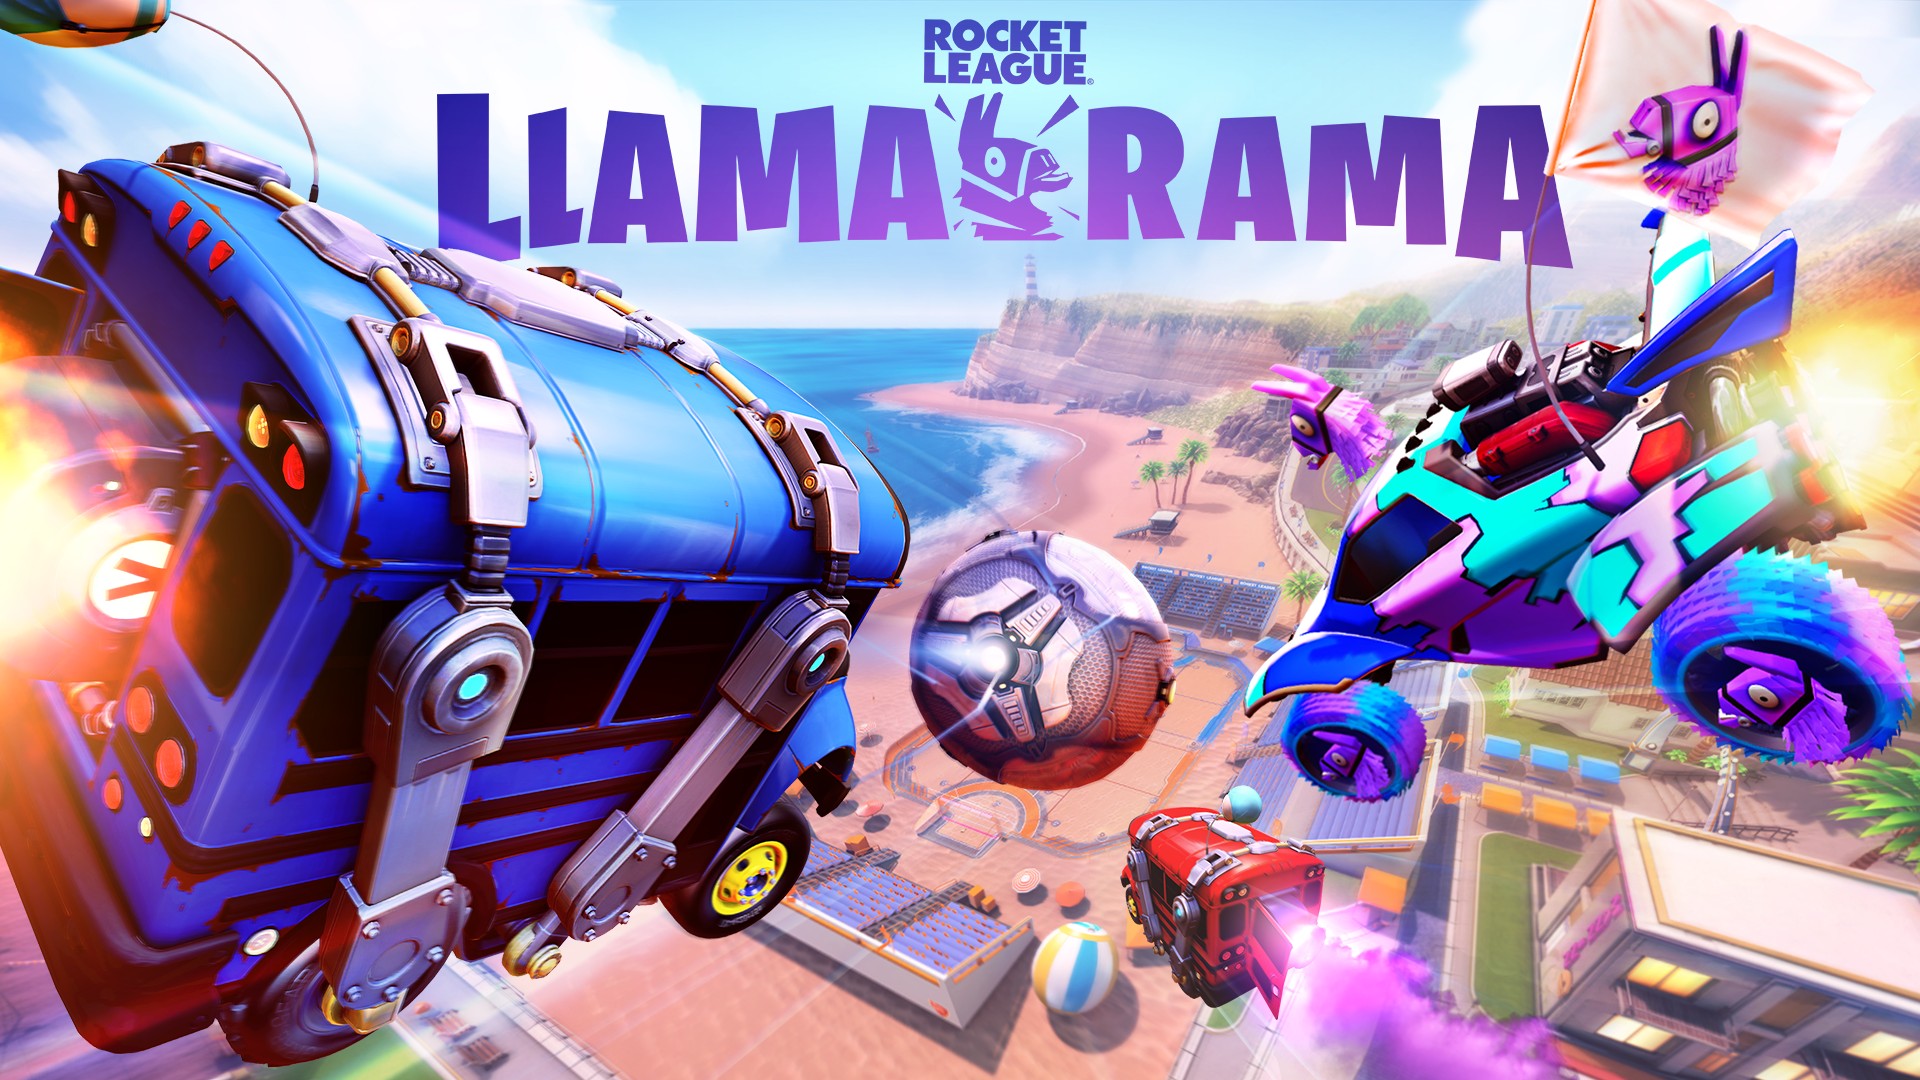 Start Your Engines For Llama Rama A Fortnite Rocket League Crossover Event Xbox Wire